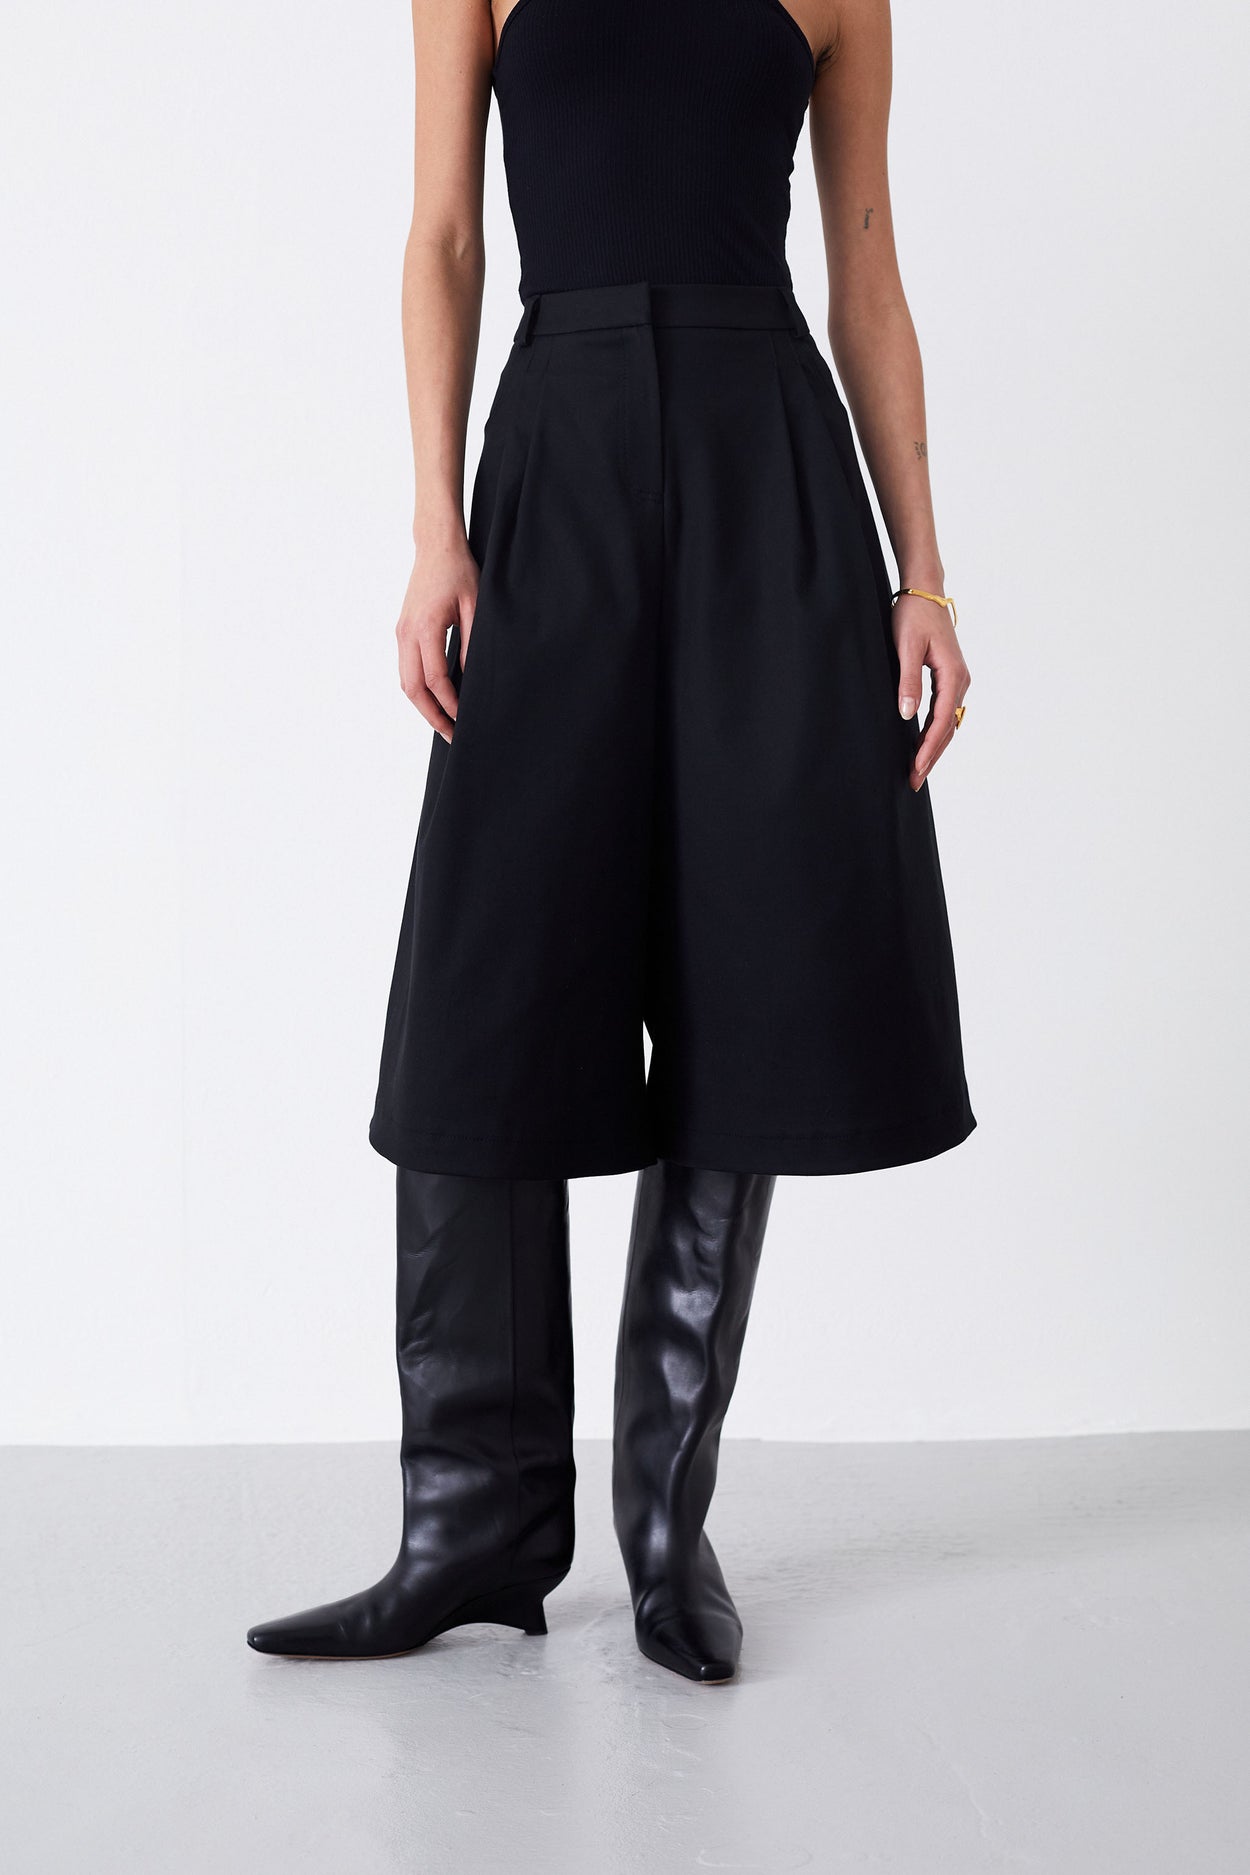 Buy Berrylush Black Solid Ruffled Flared Maxi Skirt With Attached Trousers  - Skirts for Women 7091936 | Myntra